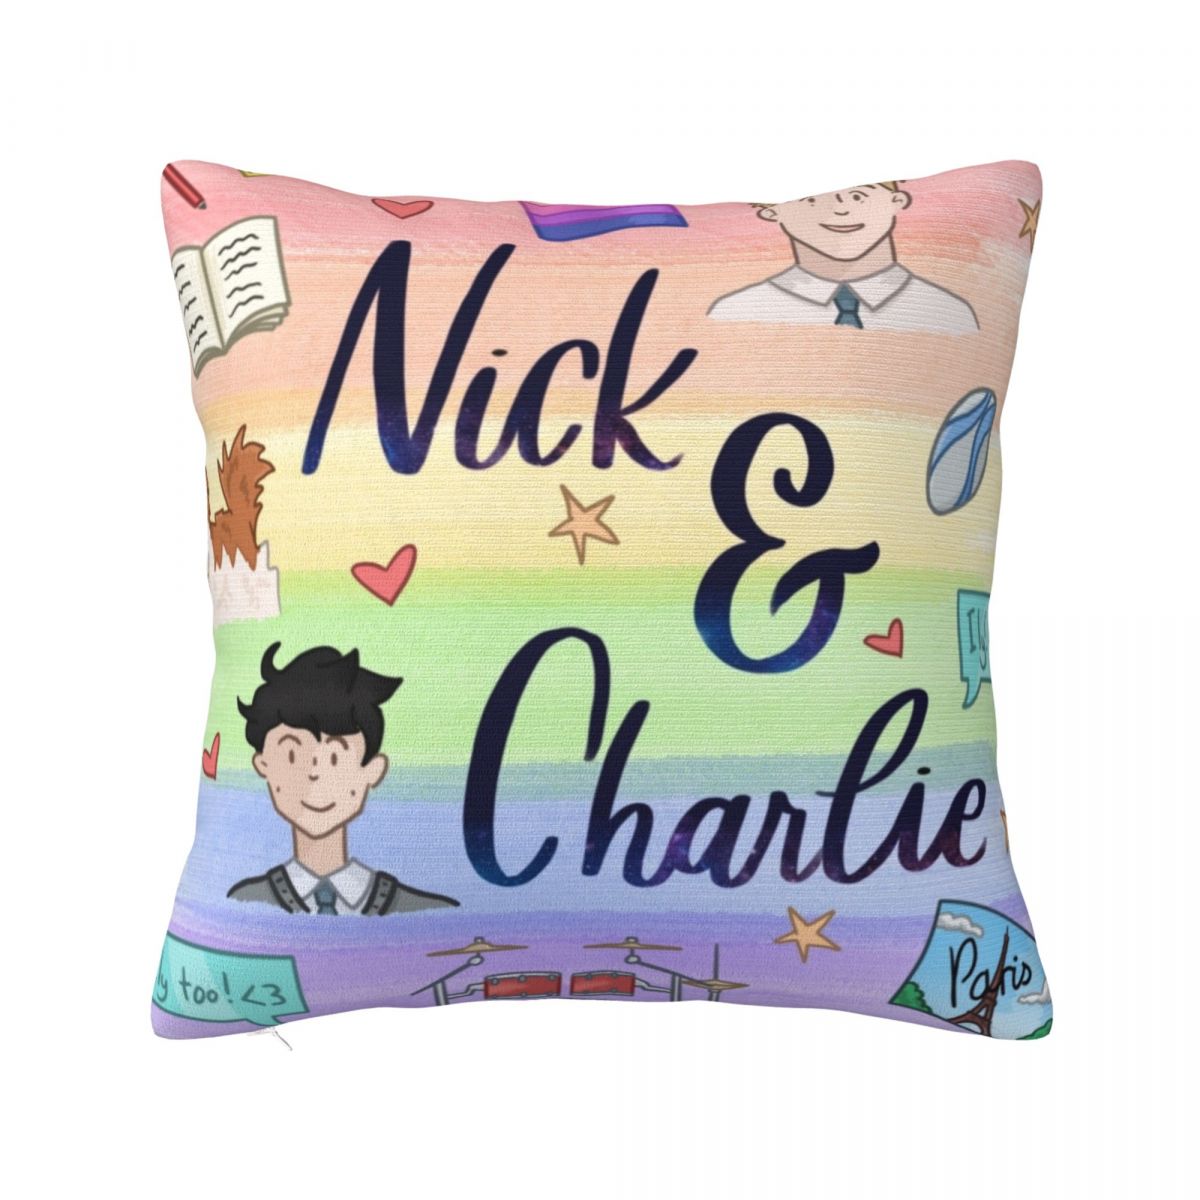 Buy Meets Boy Alice Oseman Pillowcase Cushion Cover Heartstopper Charlie Nick Boys Love Pillow Case Cover Home Square 40X40cm